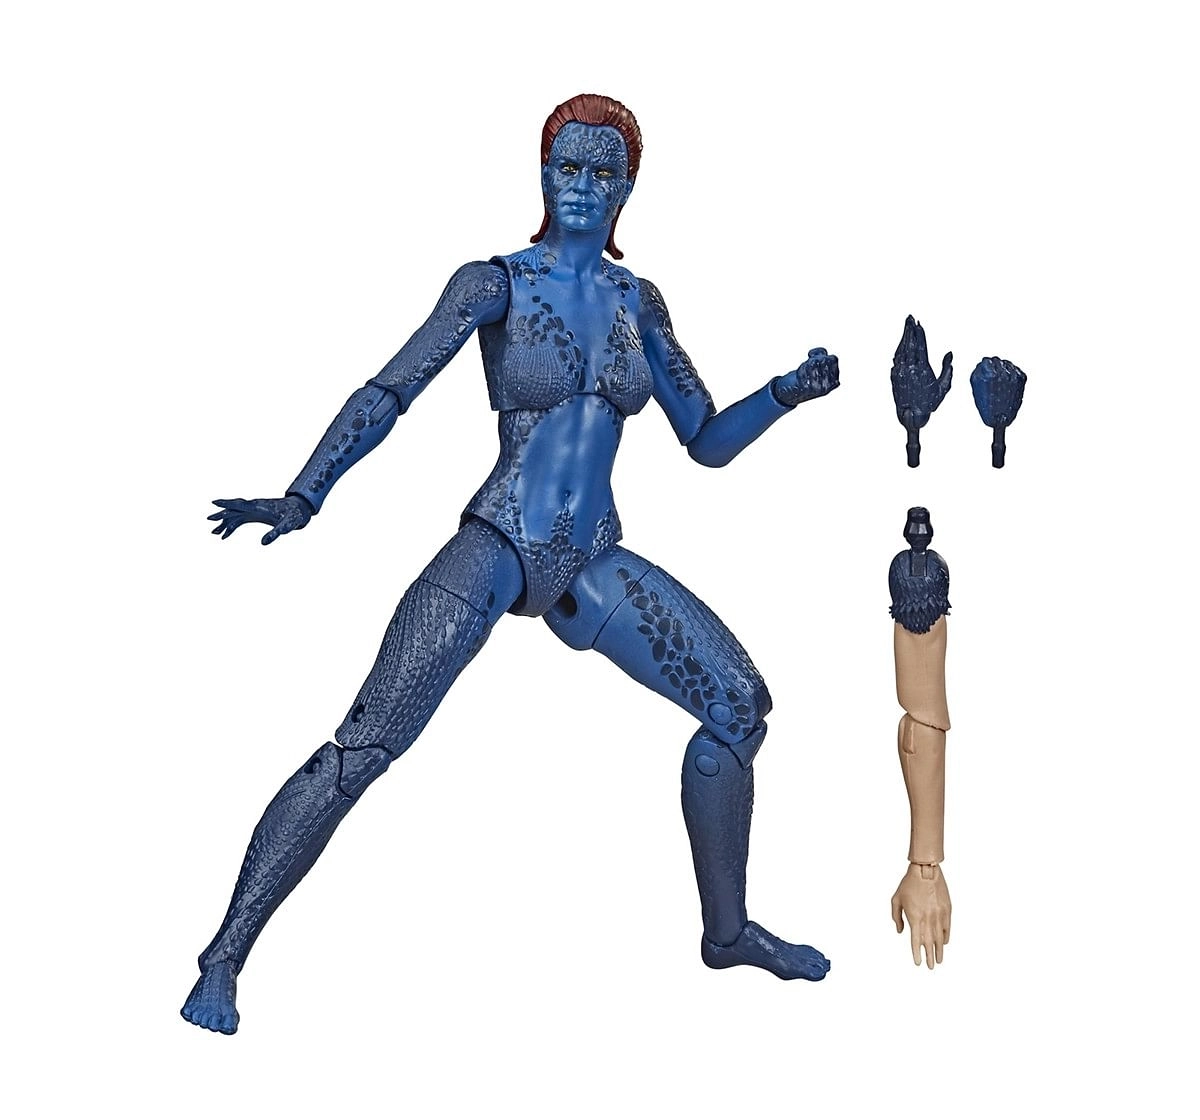 Hasbro Marvel Legends Series X-Men 6-inch Collectible Marvel’s Mystique Action Figure Toy, Ages 3 And Up 